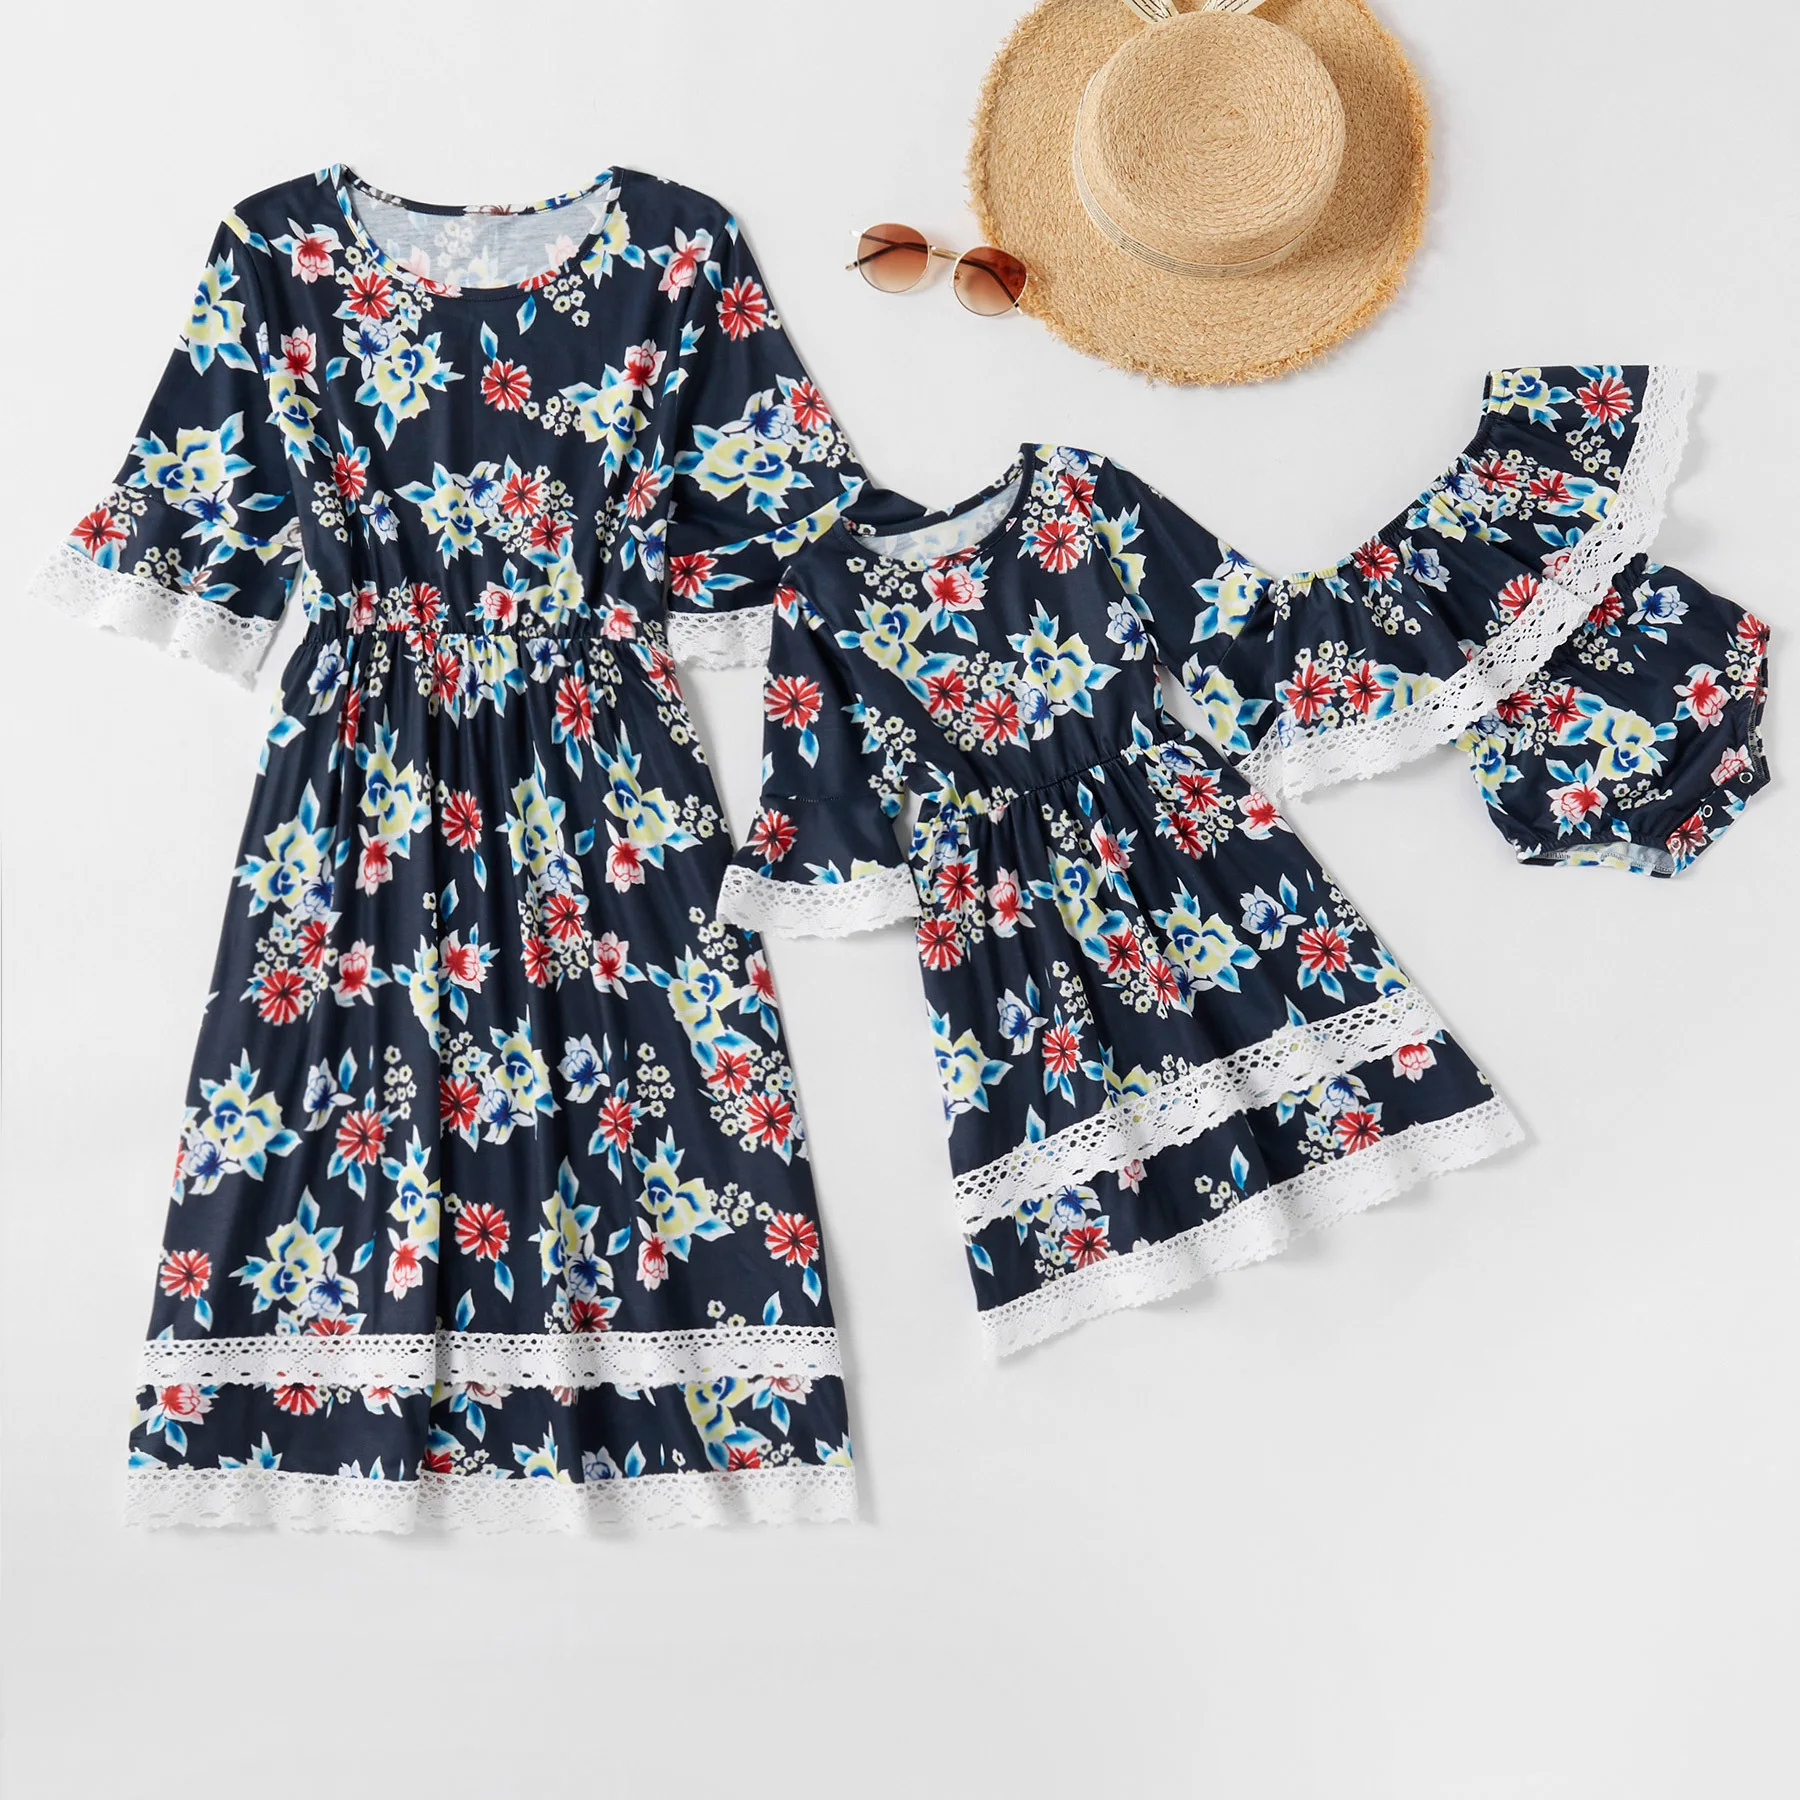 

MM-017 2021 fashion navy floral print short sleeve dresses for baby girls summer boutique mommy and me dress outfits, Picture show